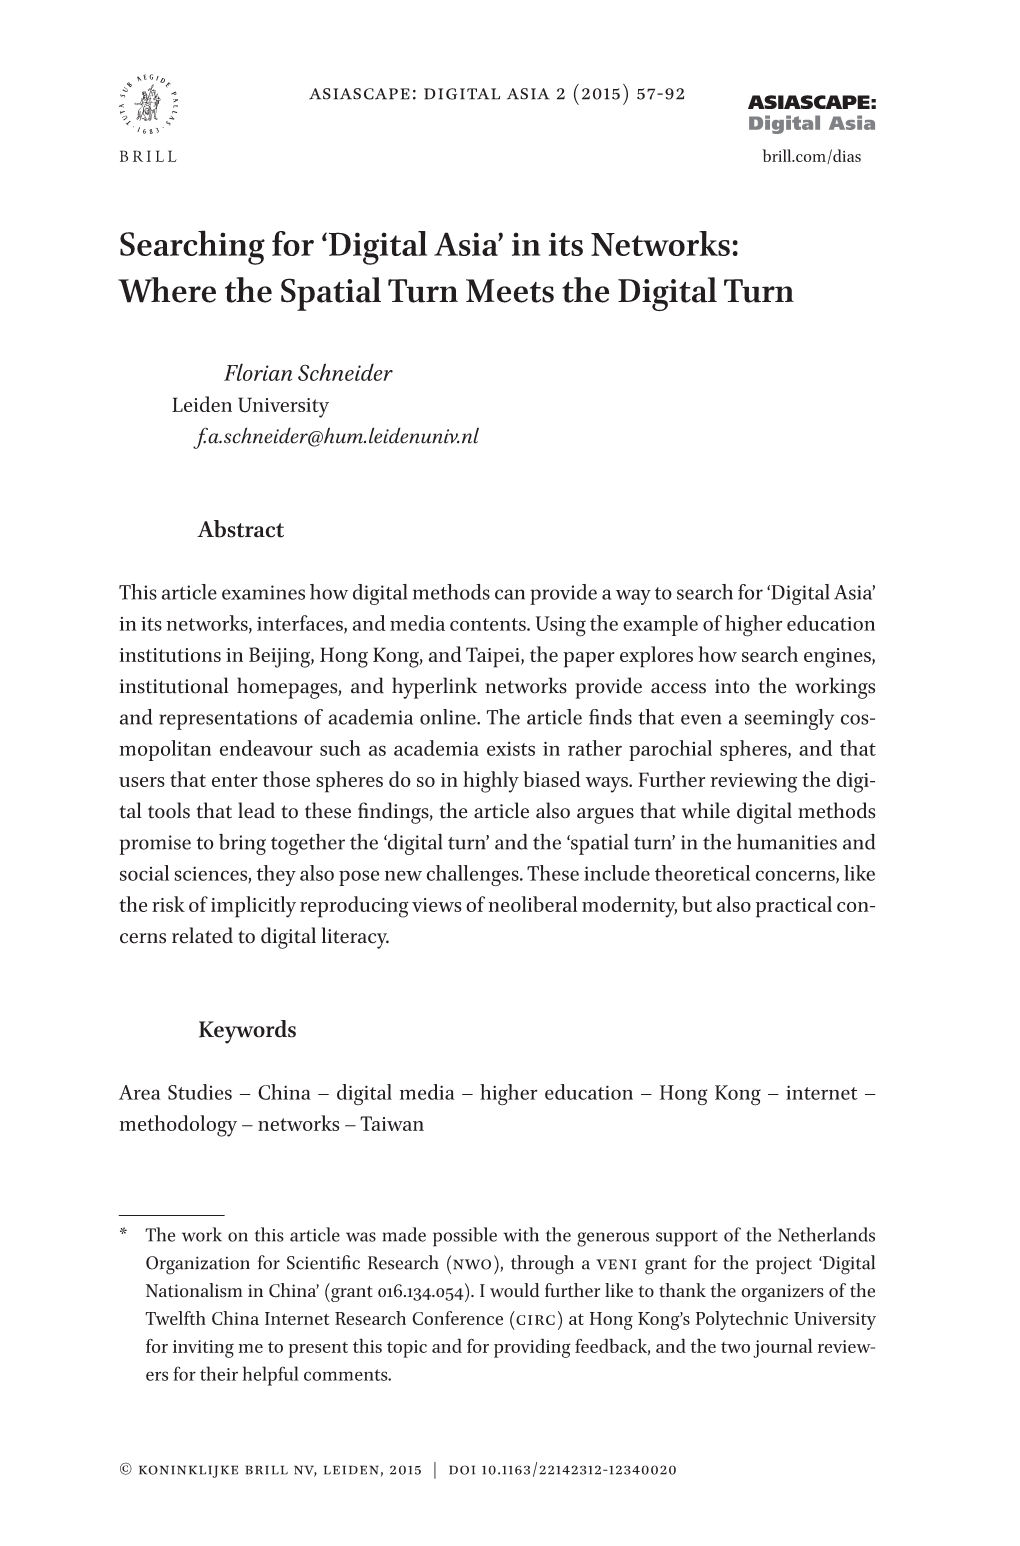 Searching for 'Digital Asia' in Its Networks: Where the Spatial Turn